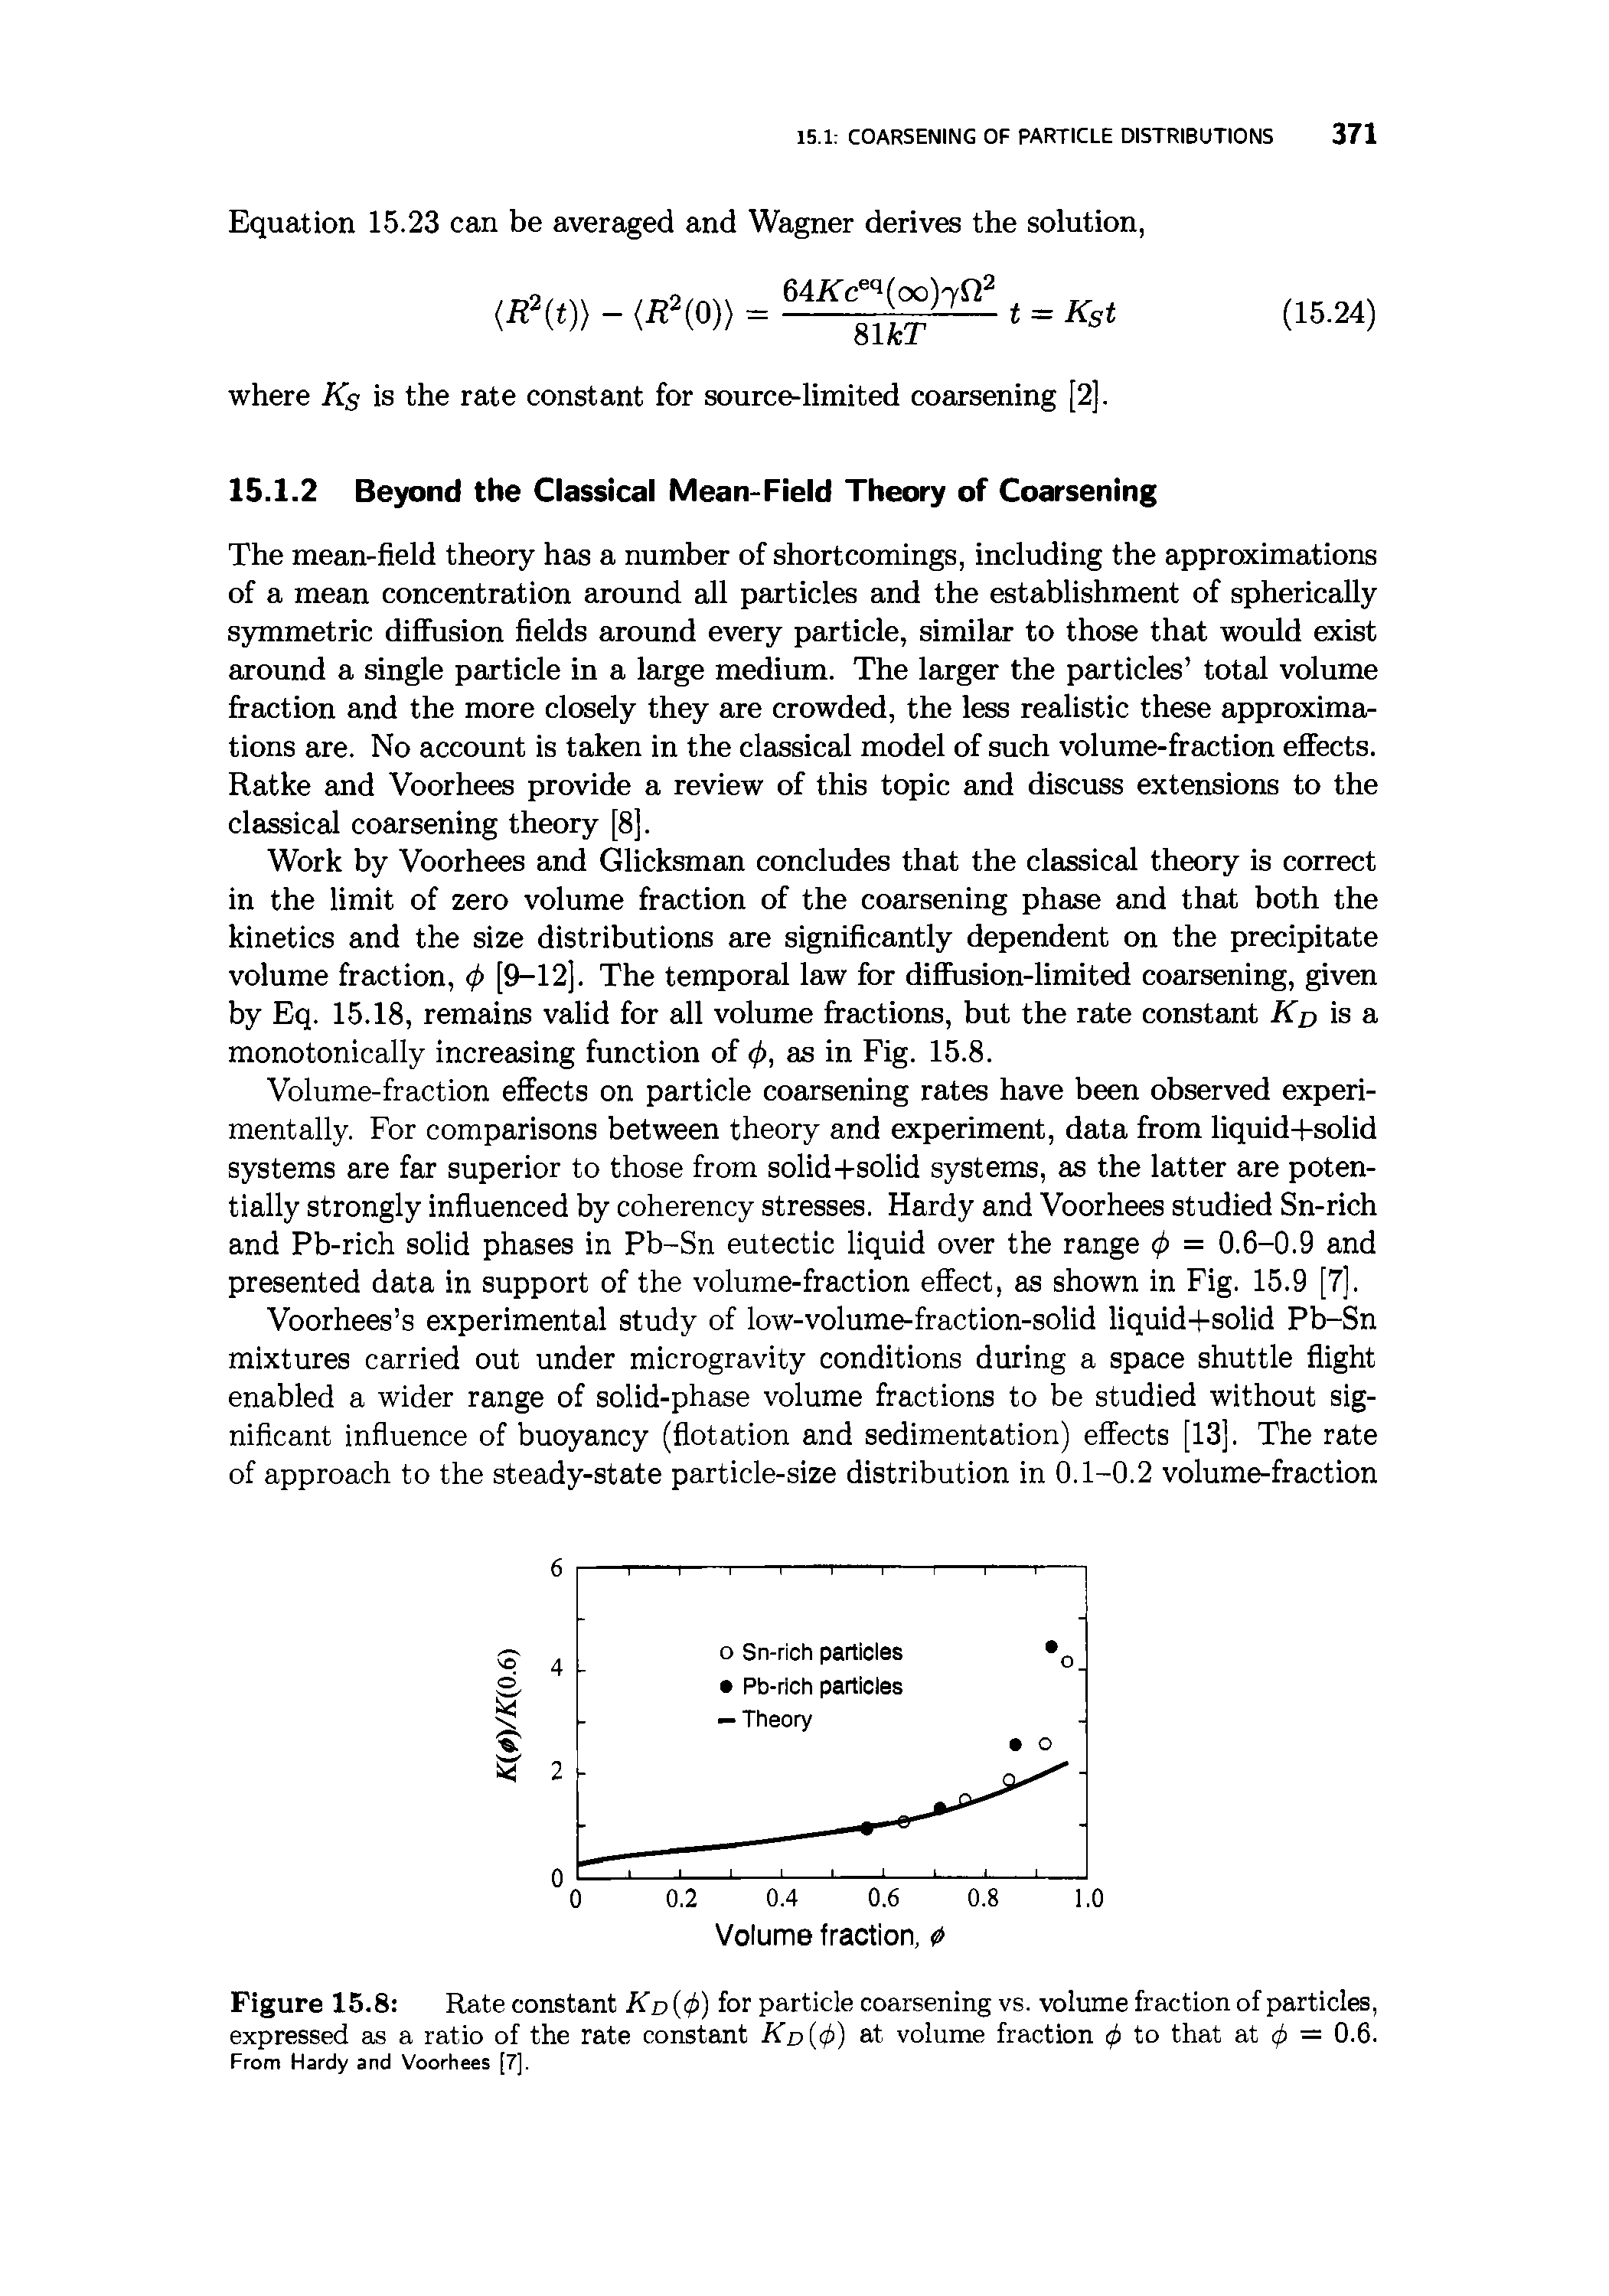 Figure 15.8 Rate constant Kd (4>) f°r particle coarsening vs. volume fraction of particles, expressed as a ratio of the rate constant Kd 4>) at volume fraction <j> to that at 0 = 0.6. From Hardy and Voorhees [7].